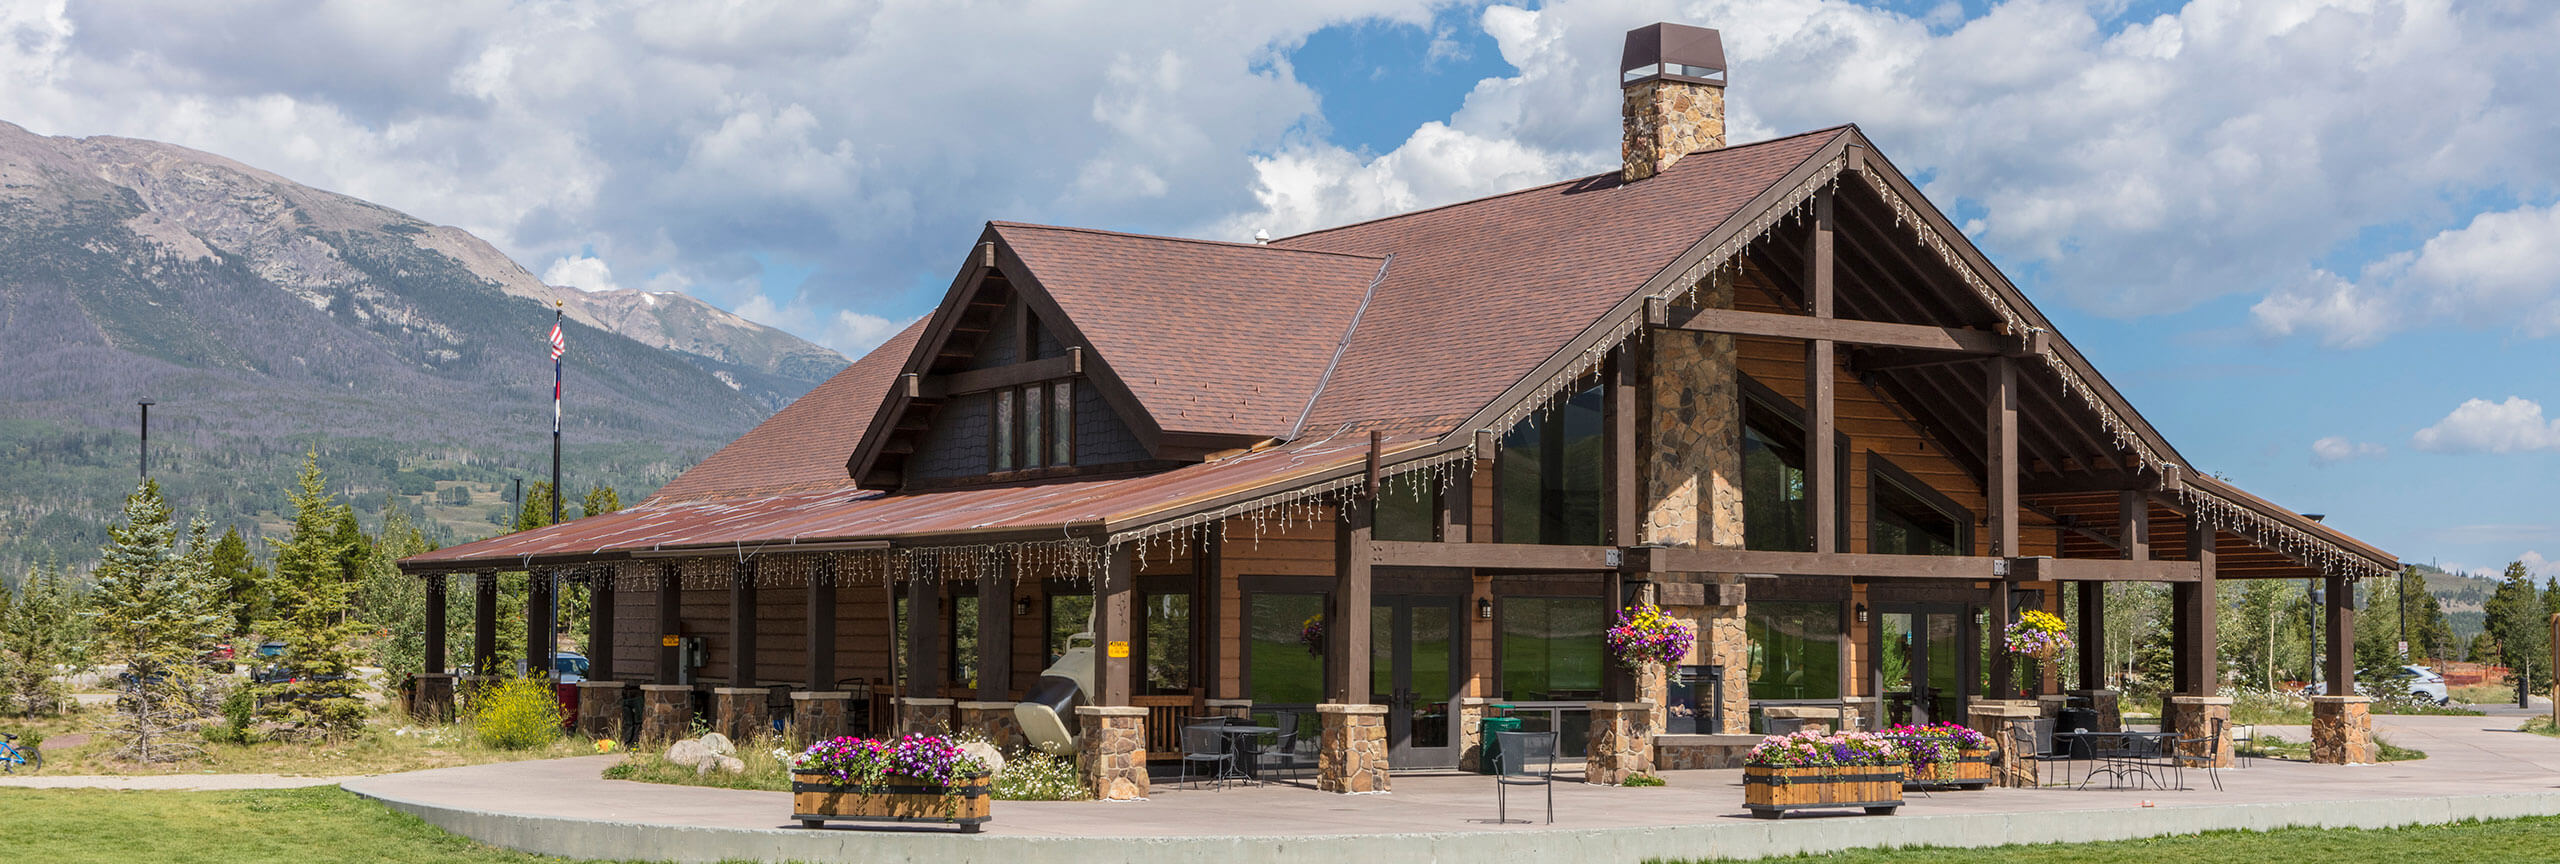 Frisco Adventure Park Day Lodge in summer